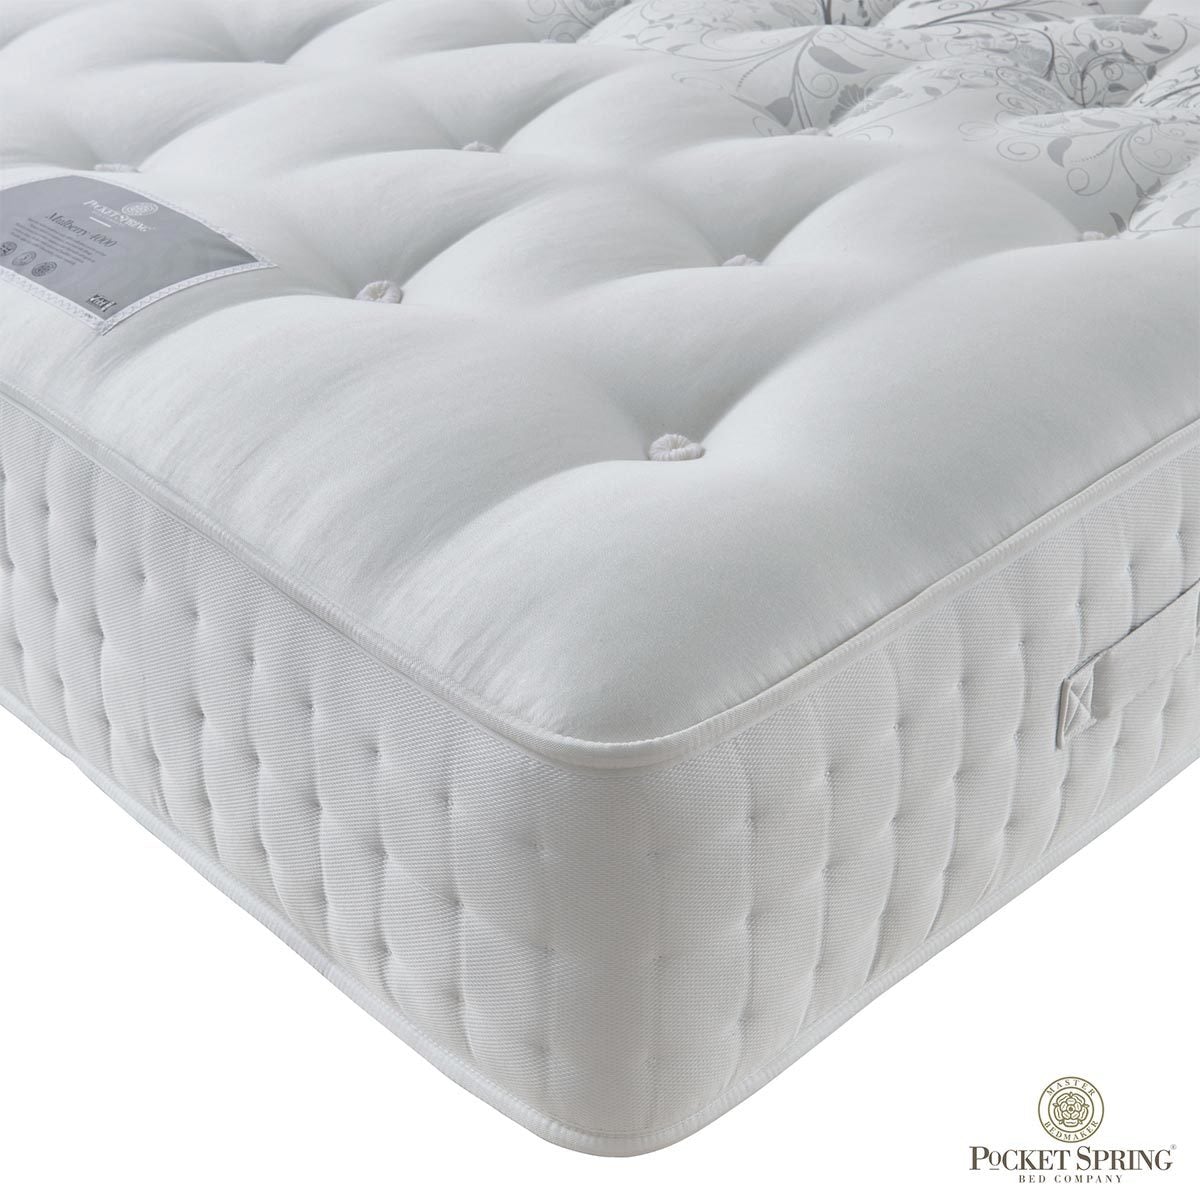 Pocket Spring Bed Company Mulberry Mattress, Double